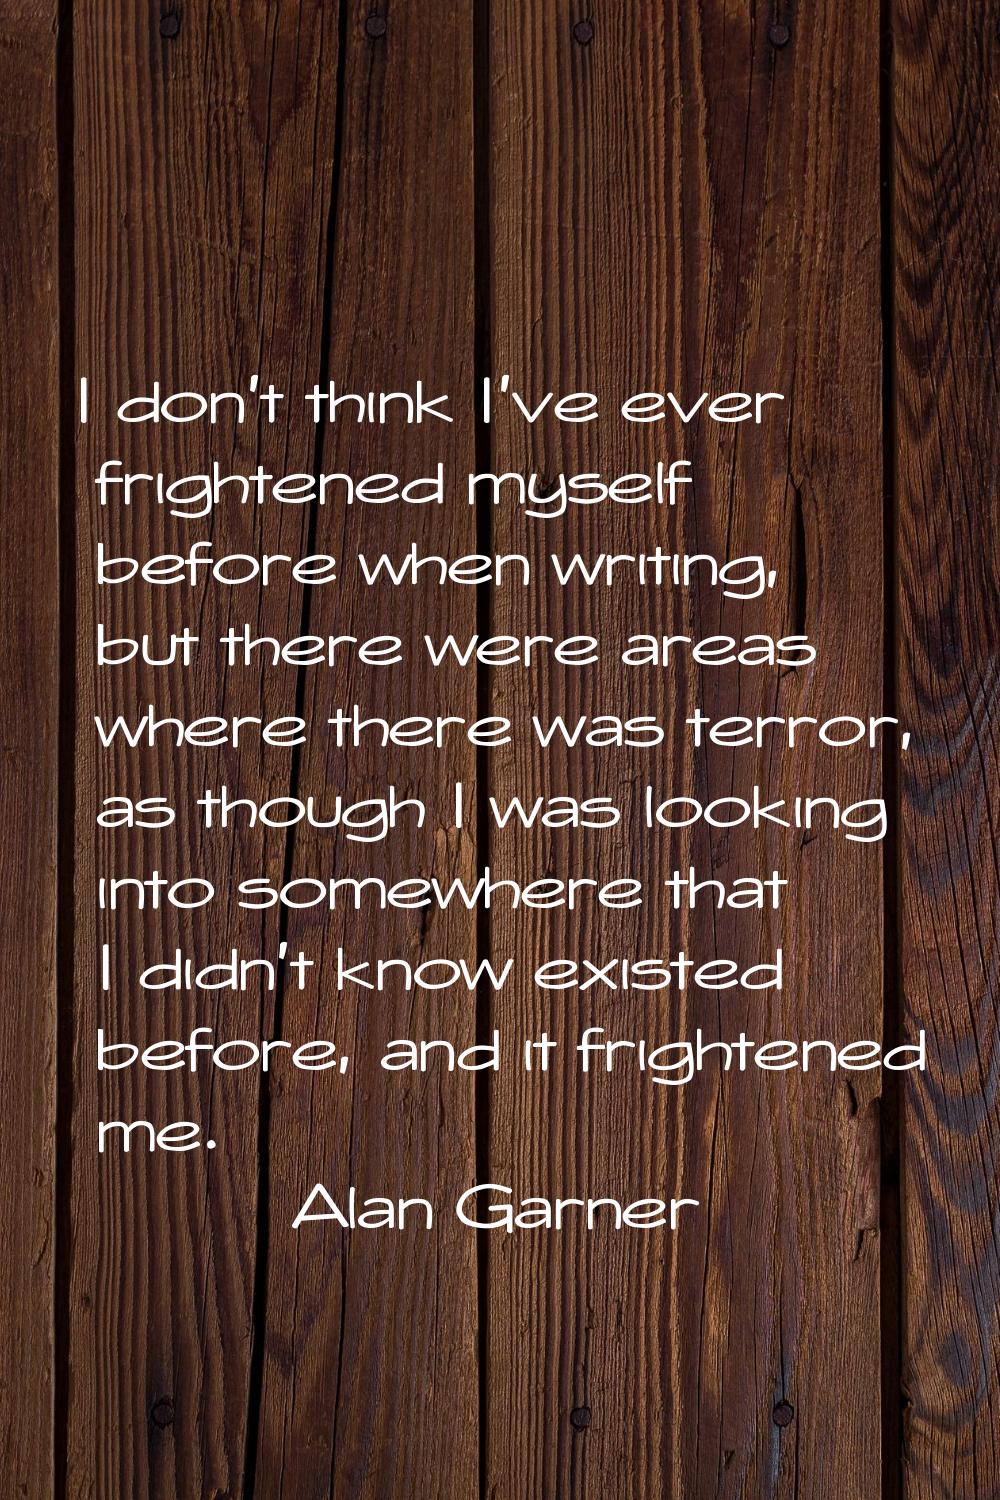 I don't think I've ever frightened myself before when writing, but there were areas where there was